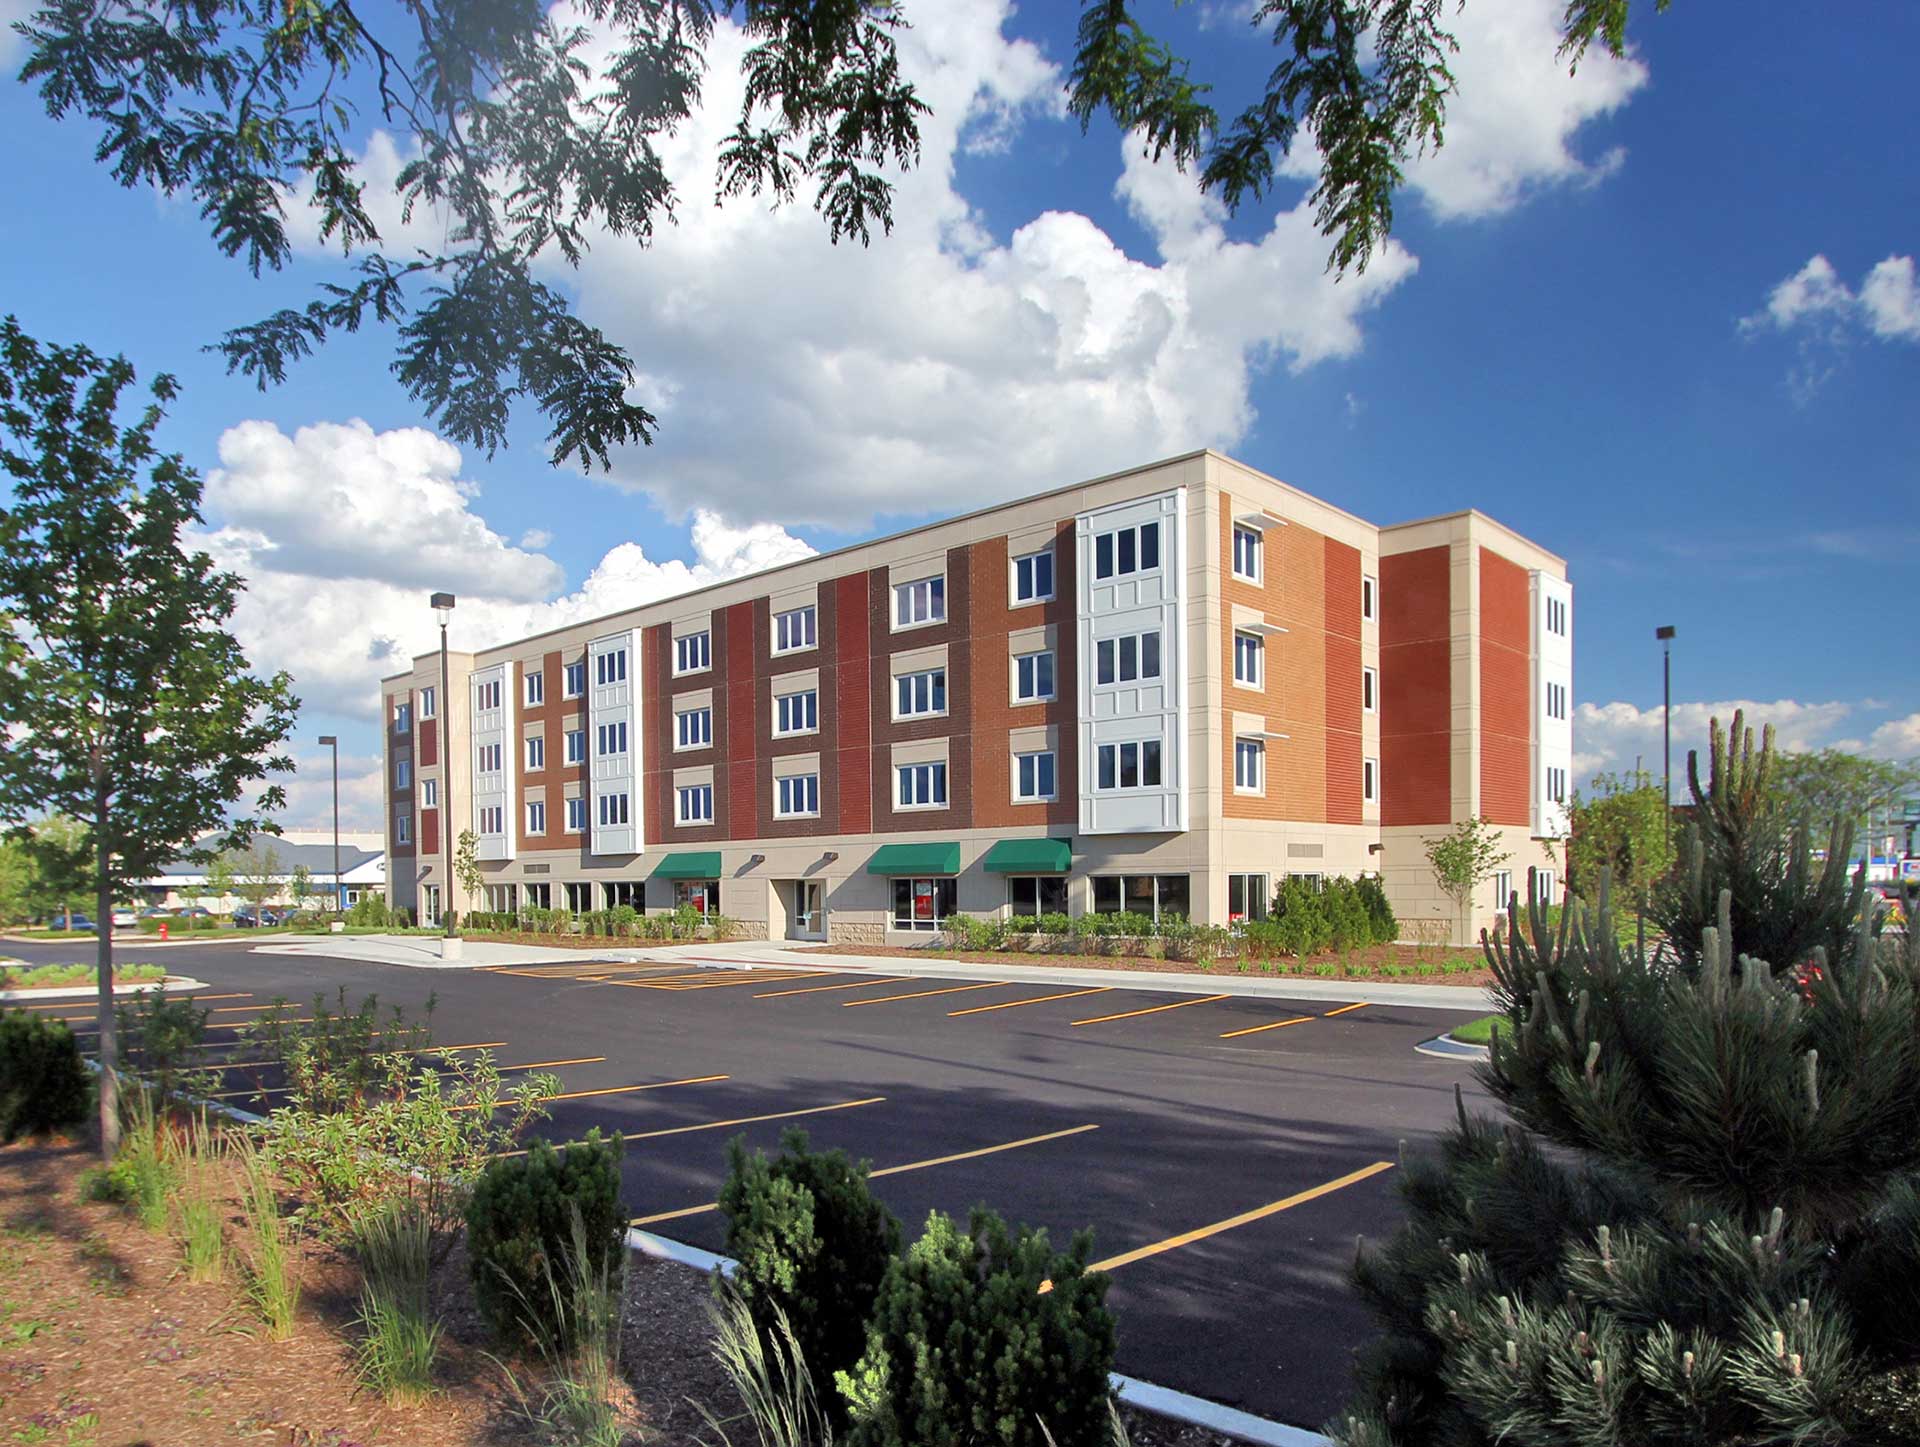 Myers Place supportive living residence in Mount Prospect, Illinois